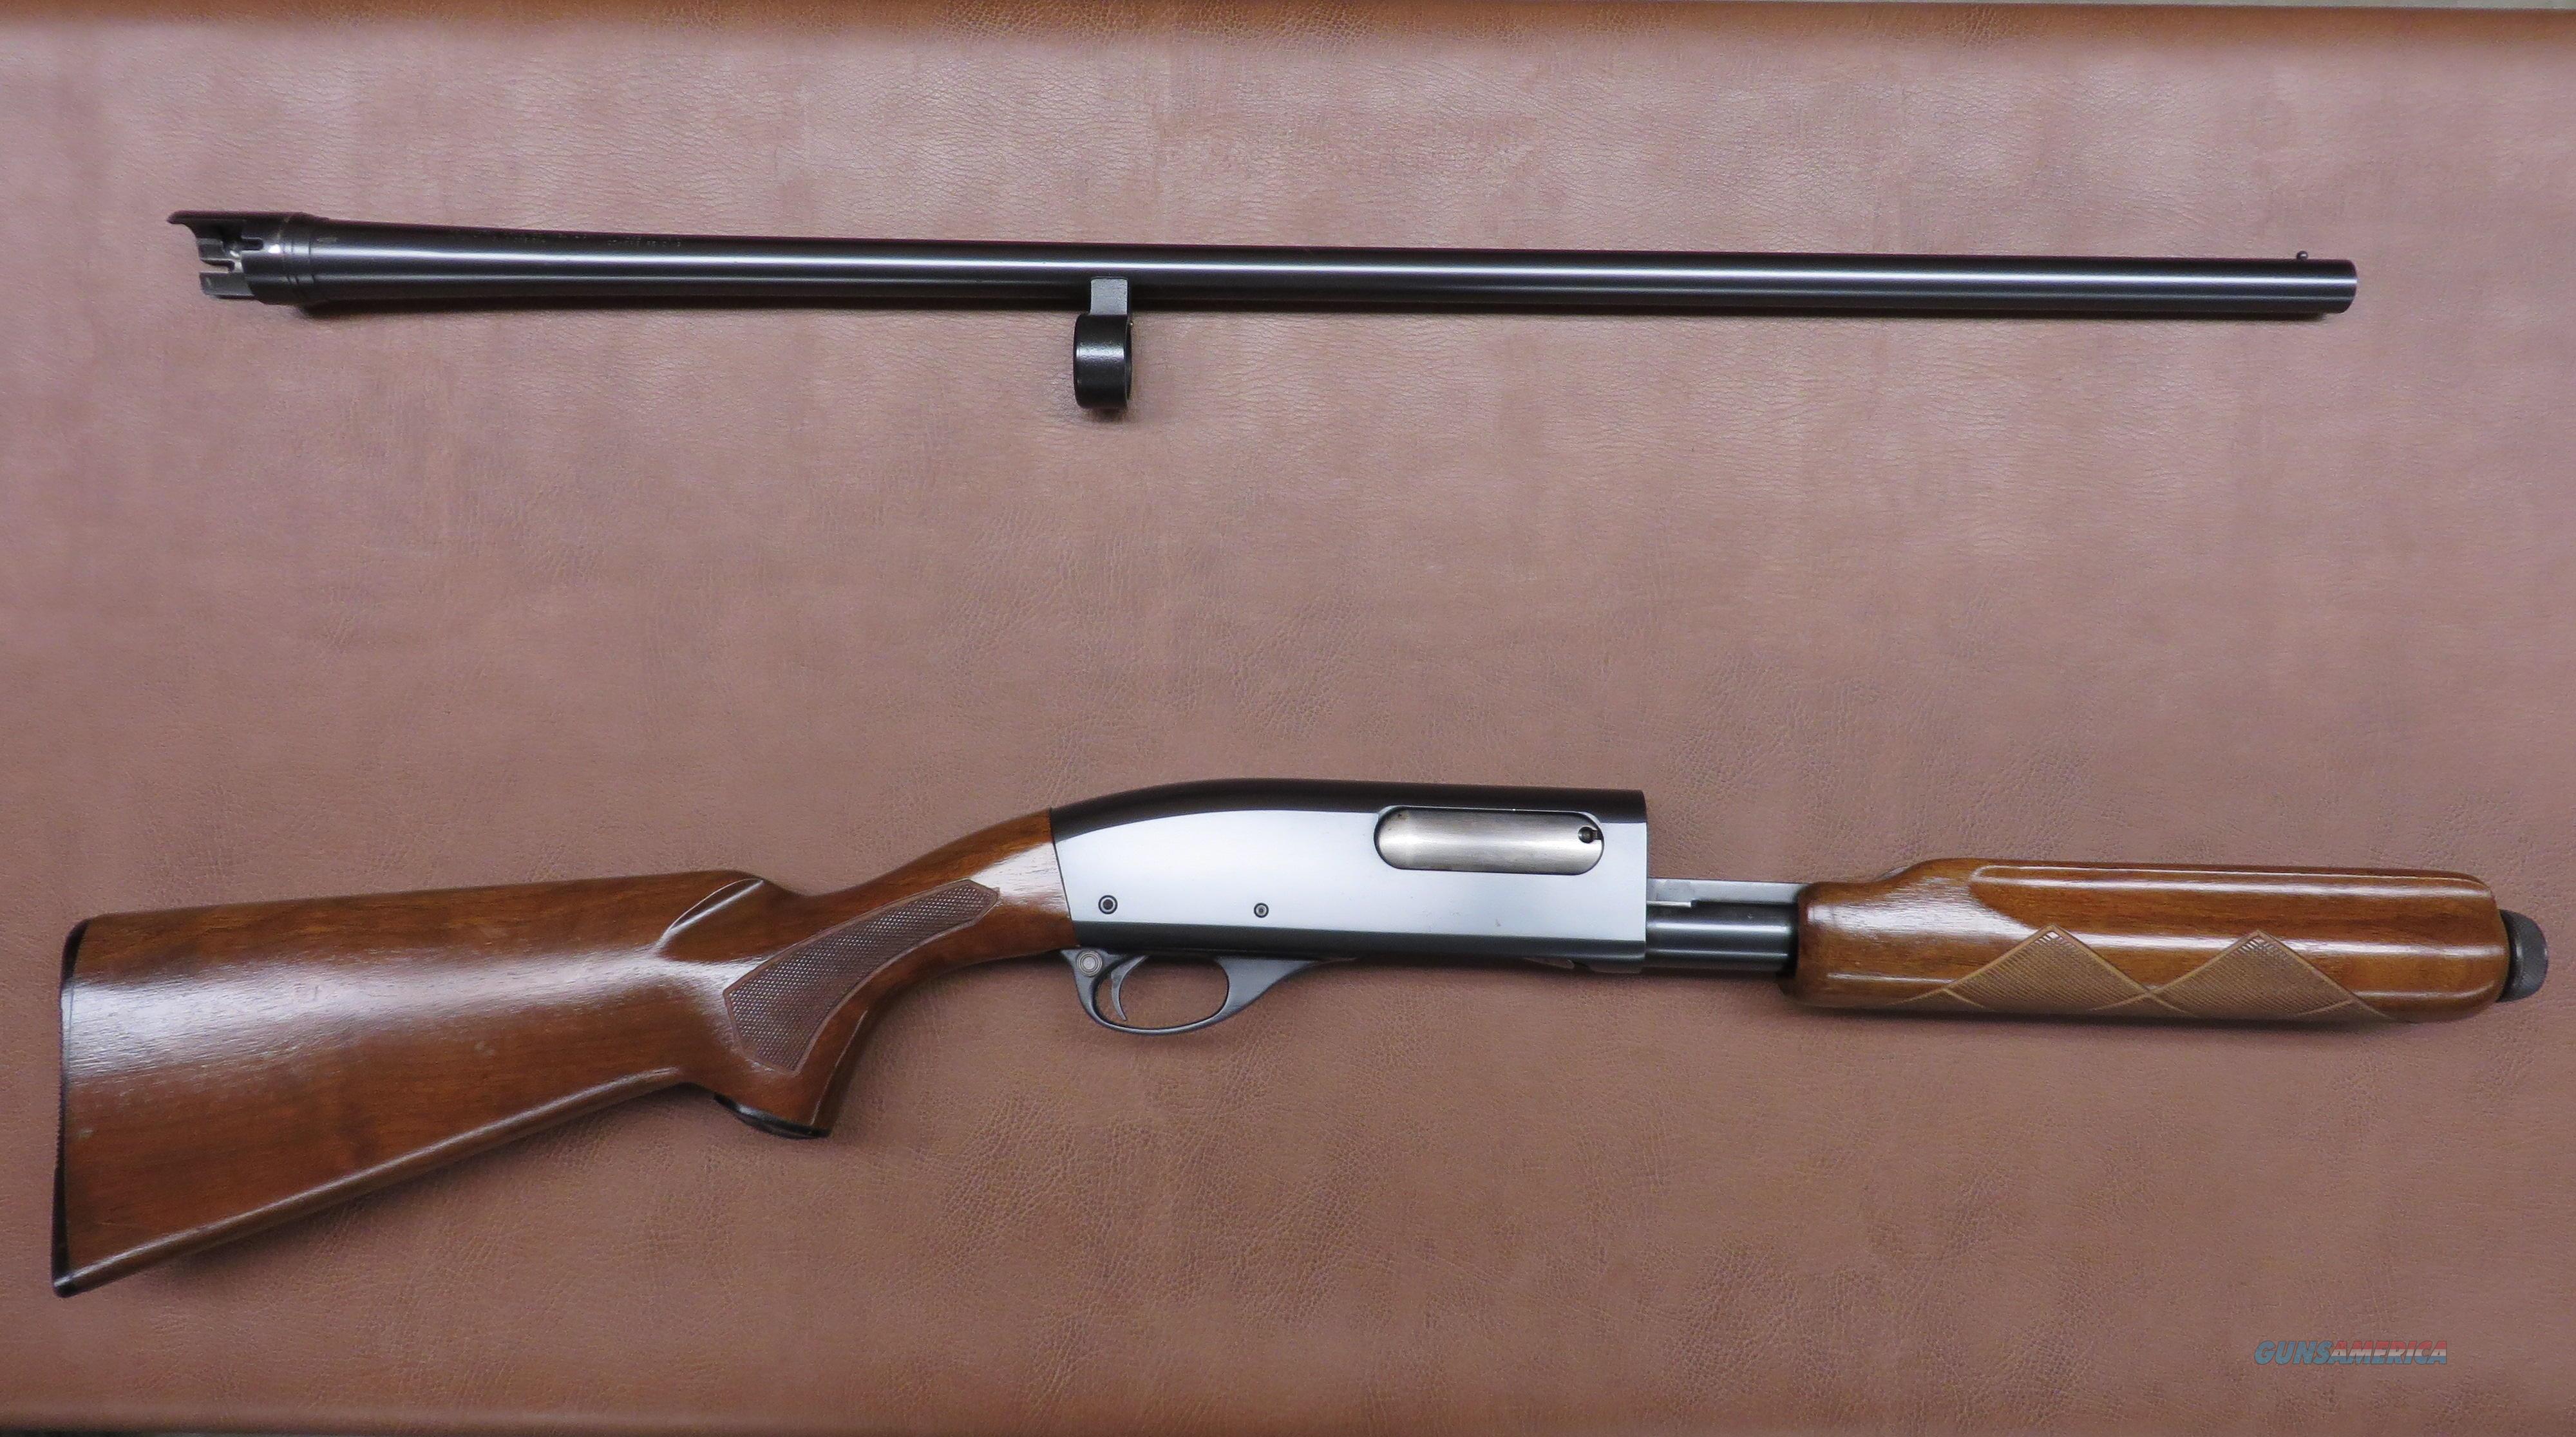 Remington 870 serial numbers date manufactured